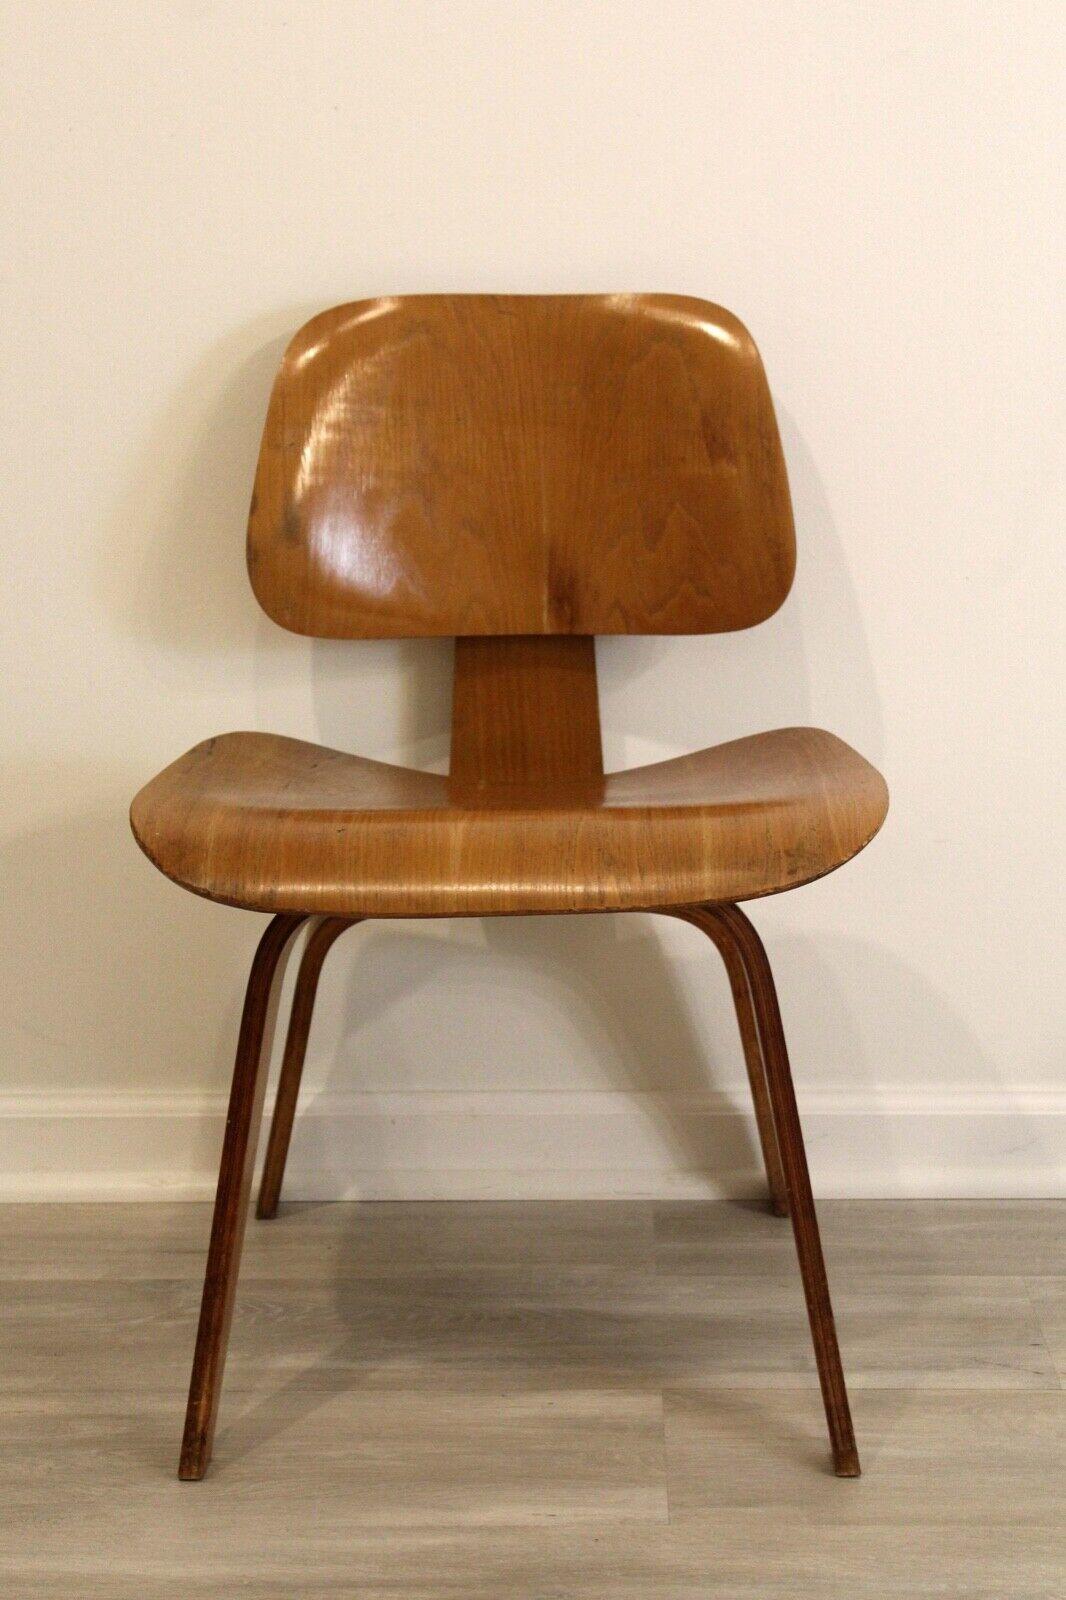 For your consideration is an original, early, molded DCW Maple wood side chair, by Charles Eames, circa the 1940s. In excellent vintage condition, with the original Evans Products Company manufacturing tag still in tact and attached. Dimensions: